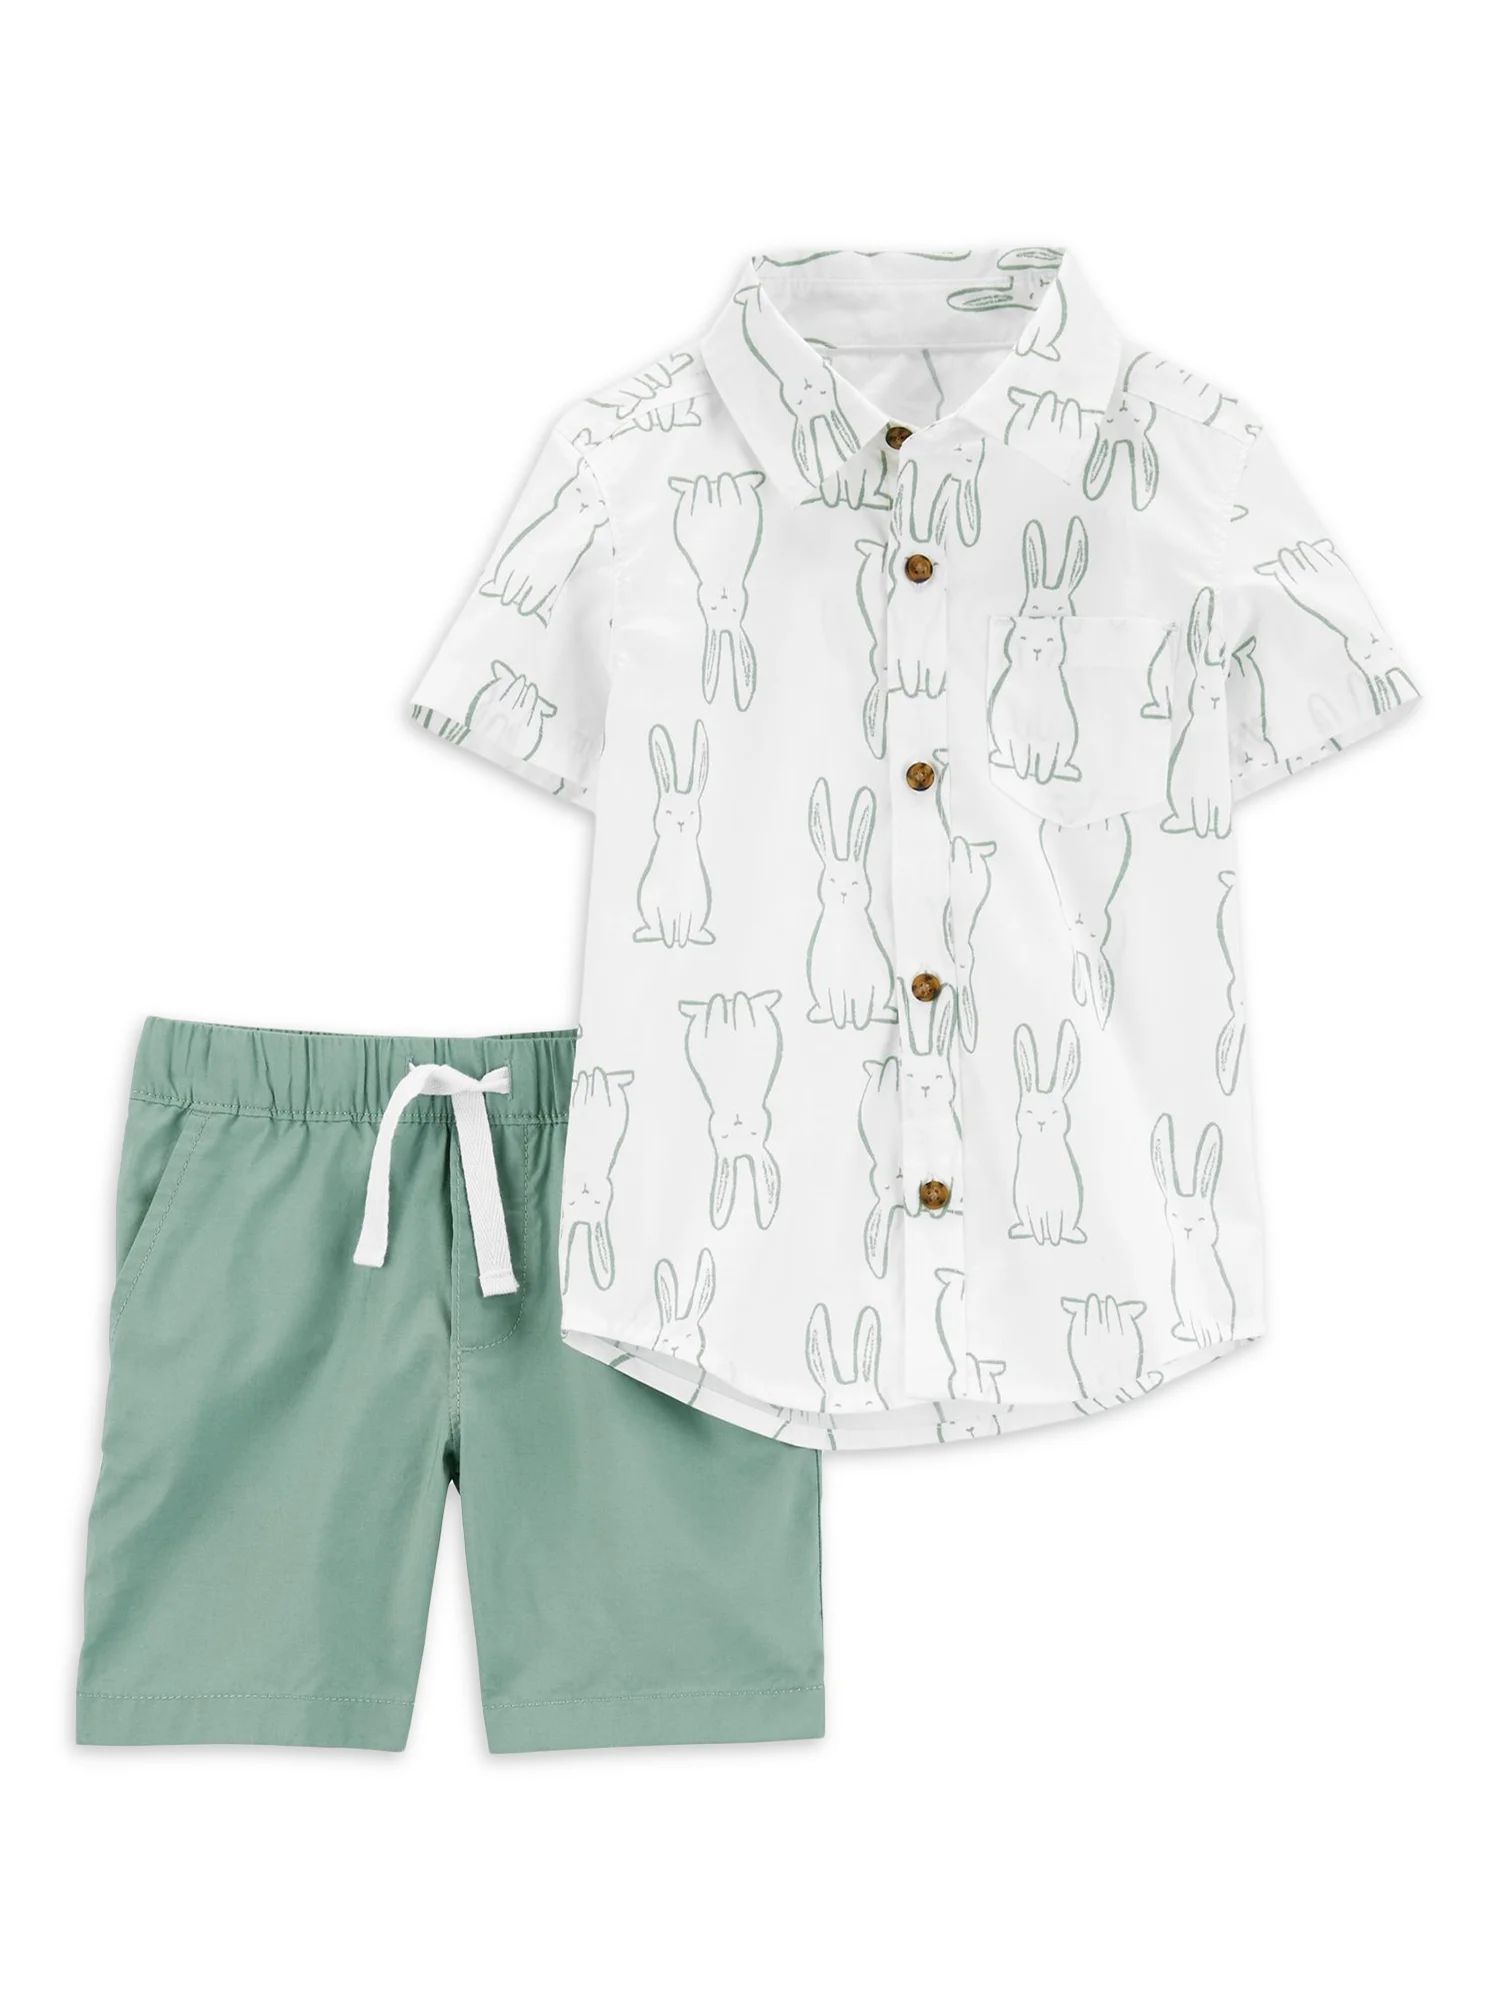 Carter's Child of Mine Baby and Toddler Boy Easter Shorts Outfit Set, 2-Piece, Sizes 12M-5T | Walmart (US)